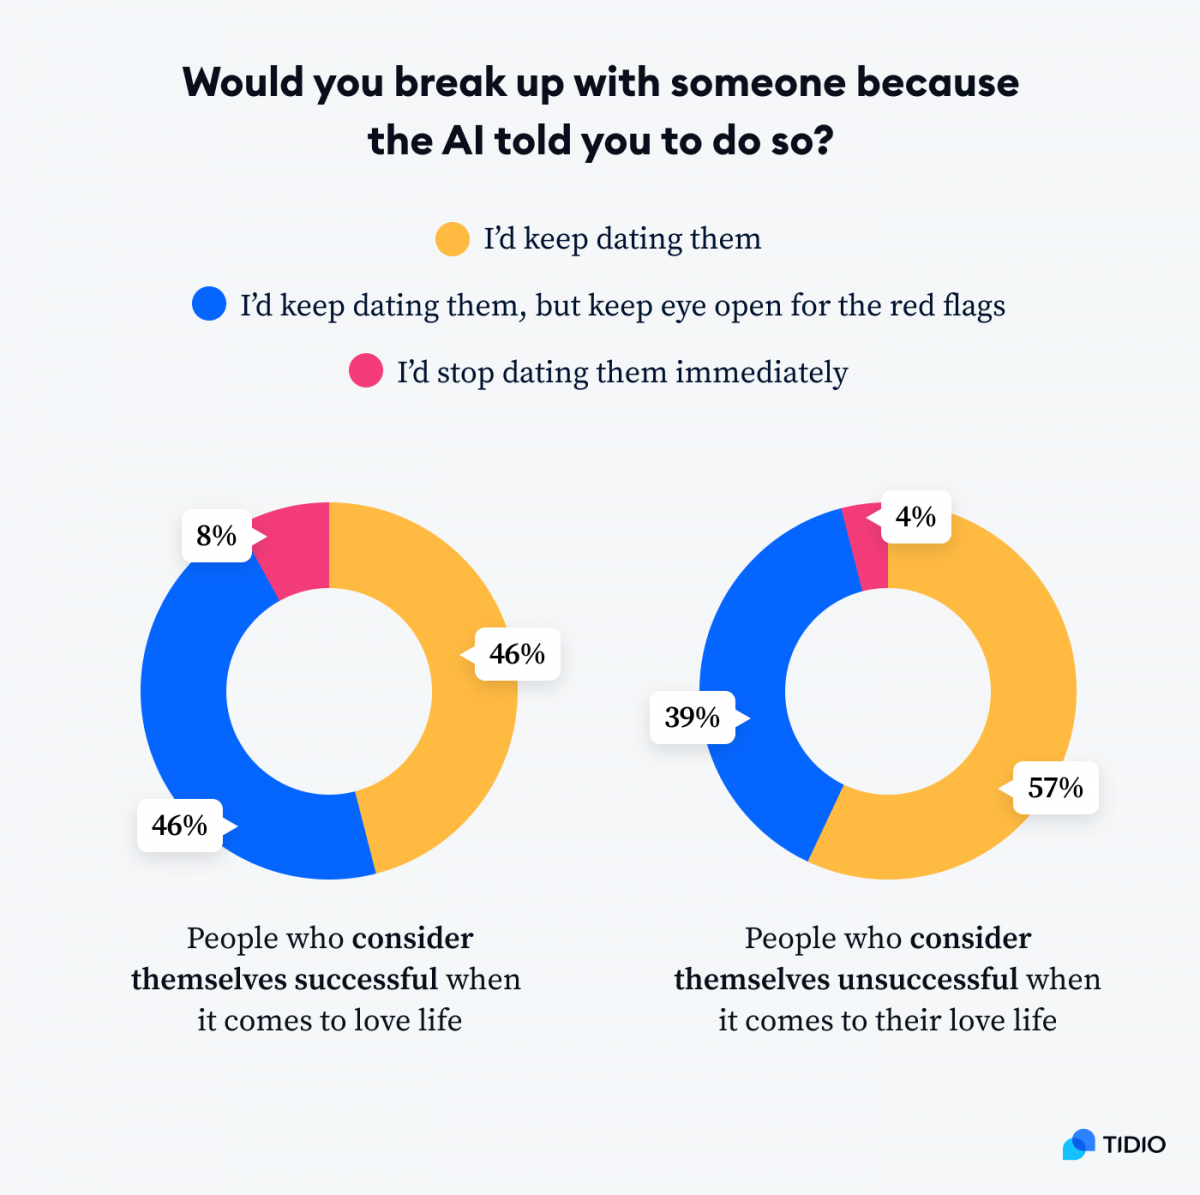 An infographic titled Would you break up with someone because the AI told you to do so? - responses from people who consider themselves successful when it comes to their love life